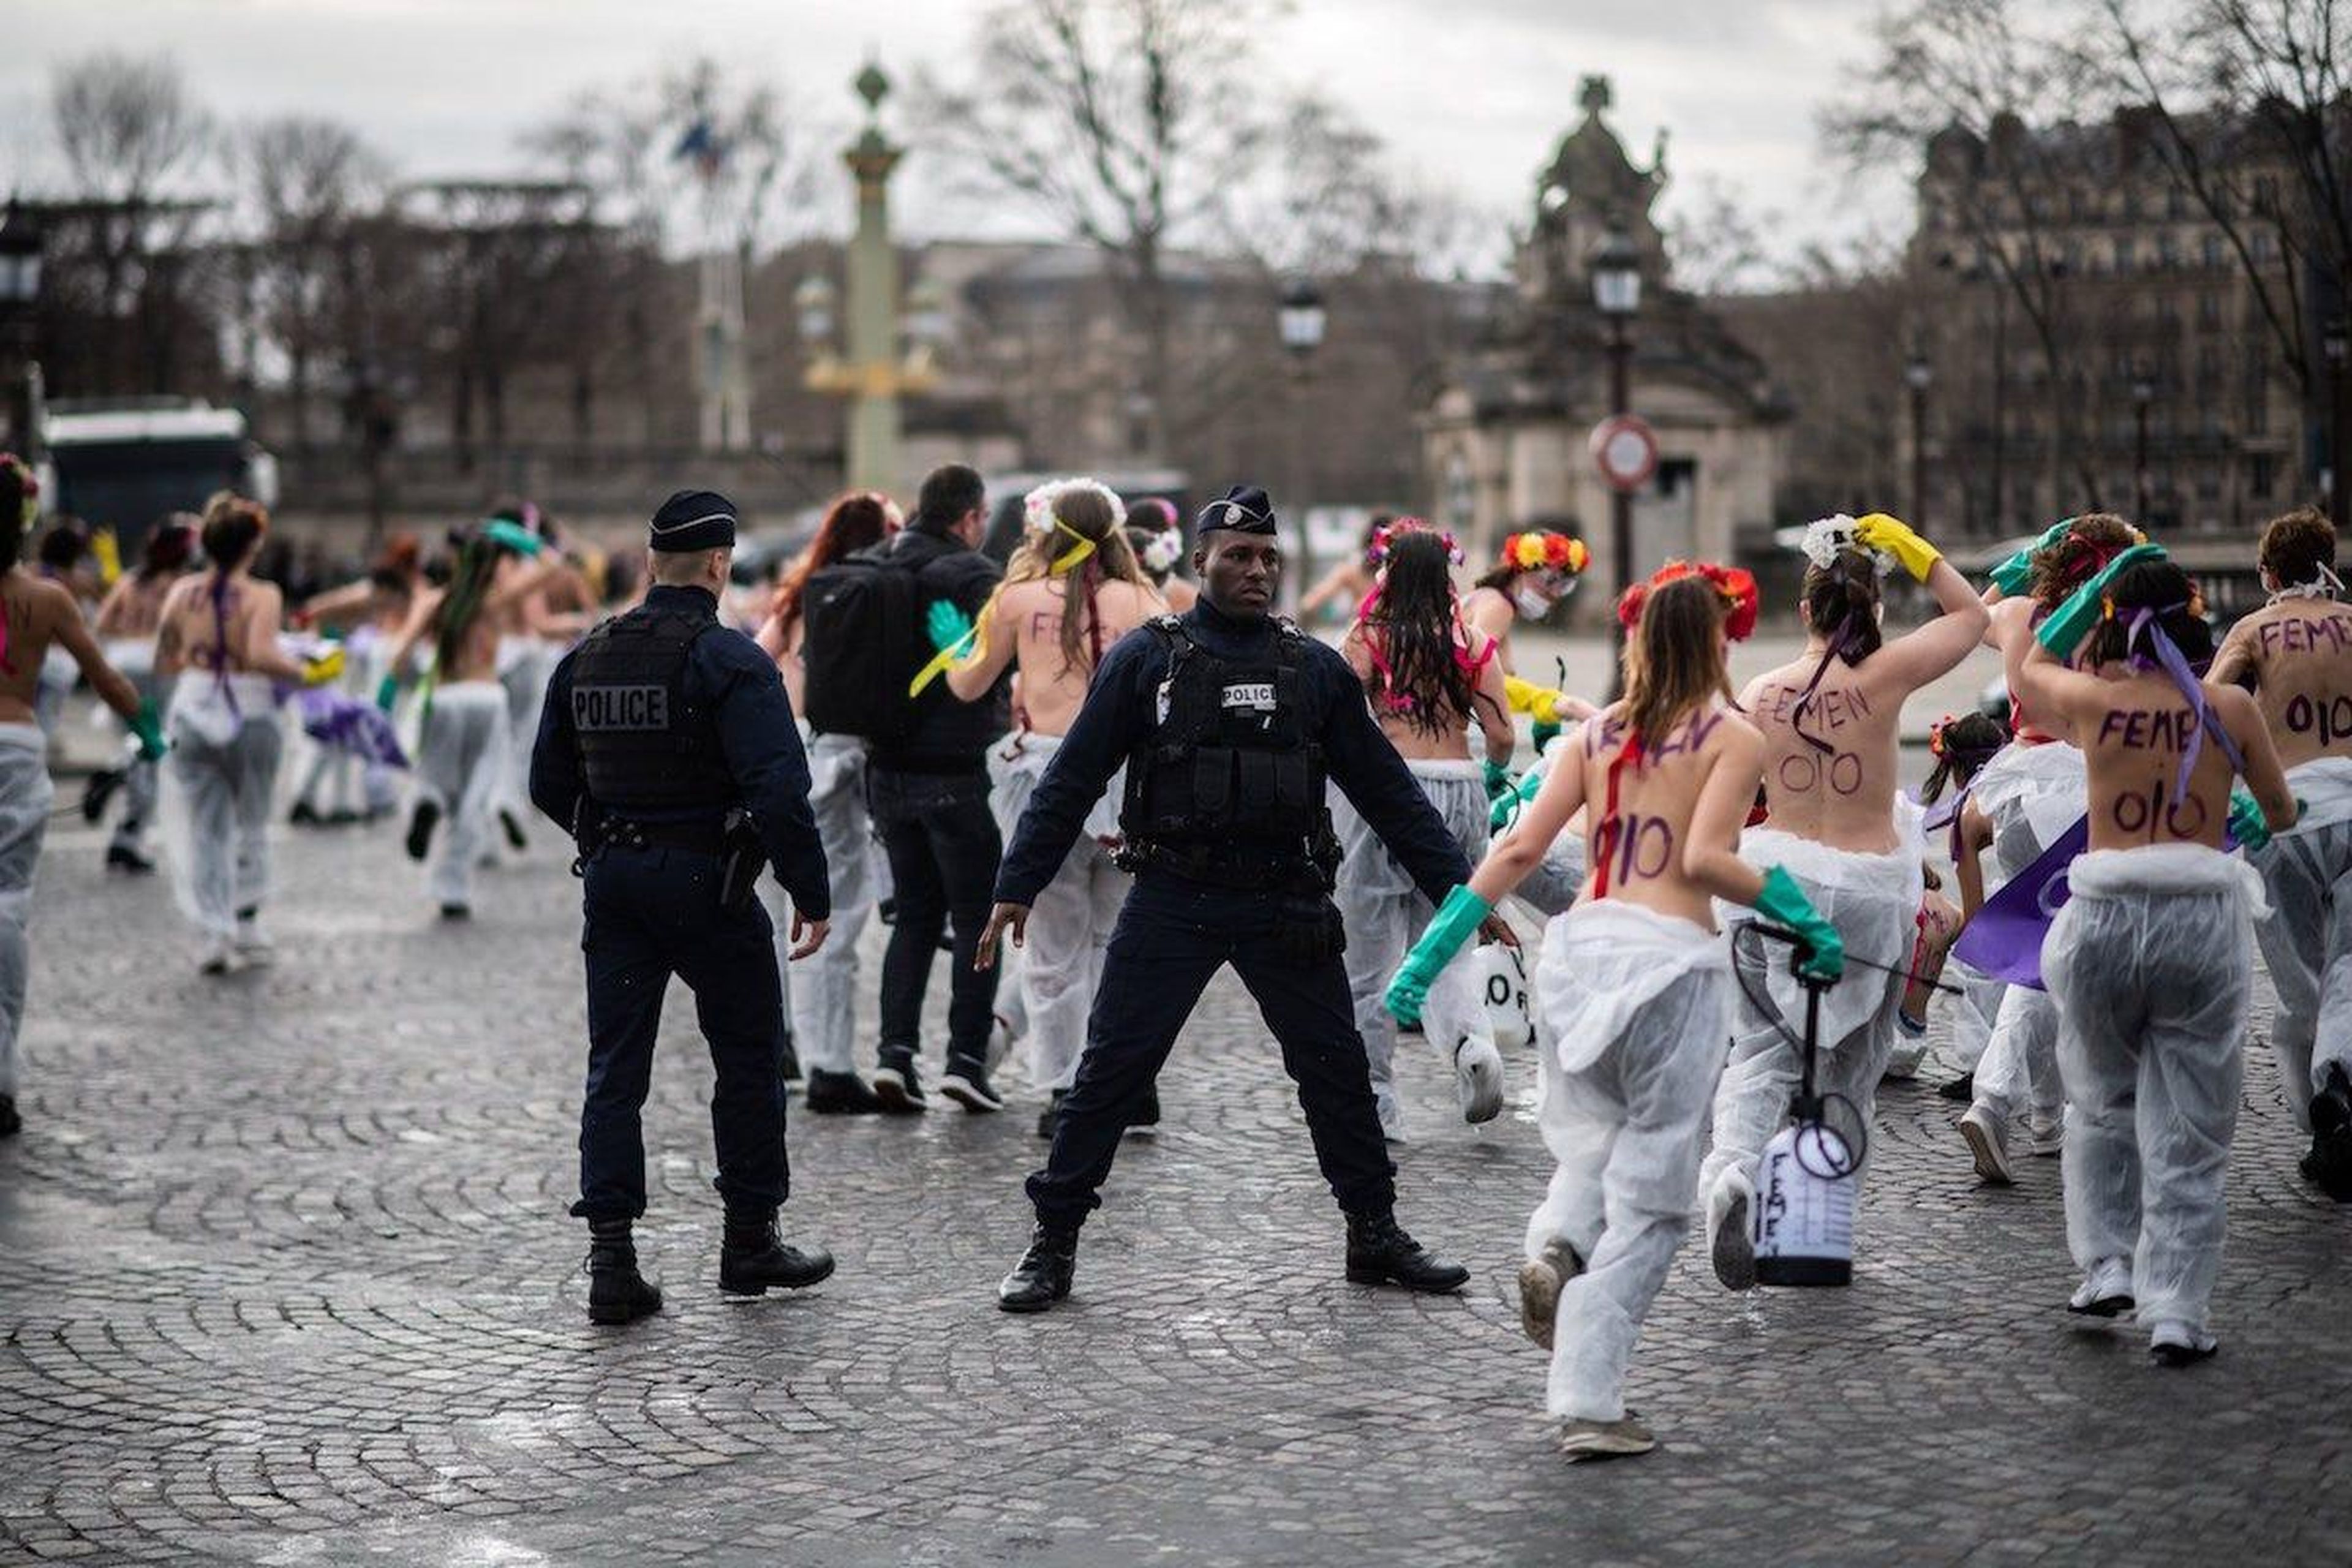 Femen activists demonstrate at Place de la Concorde in Paris to call for gender equality.